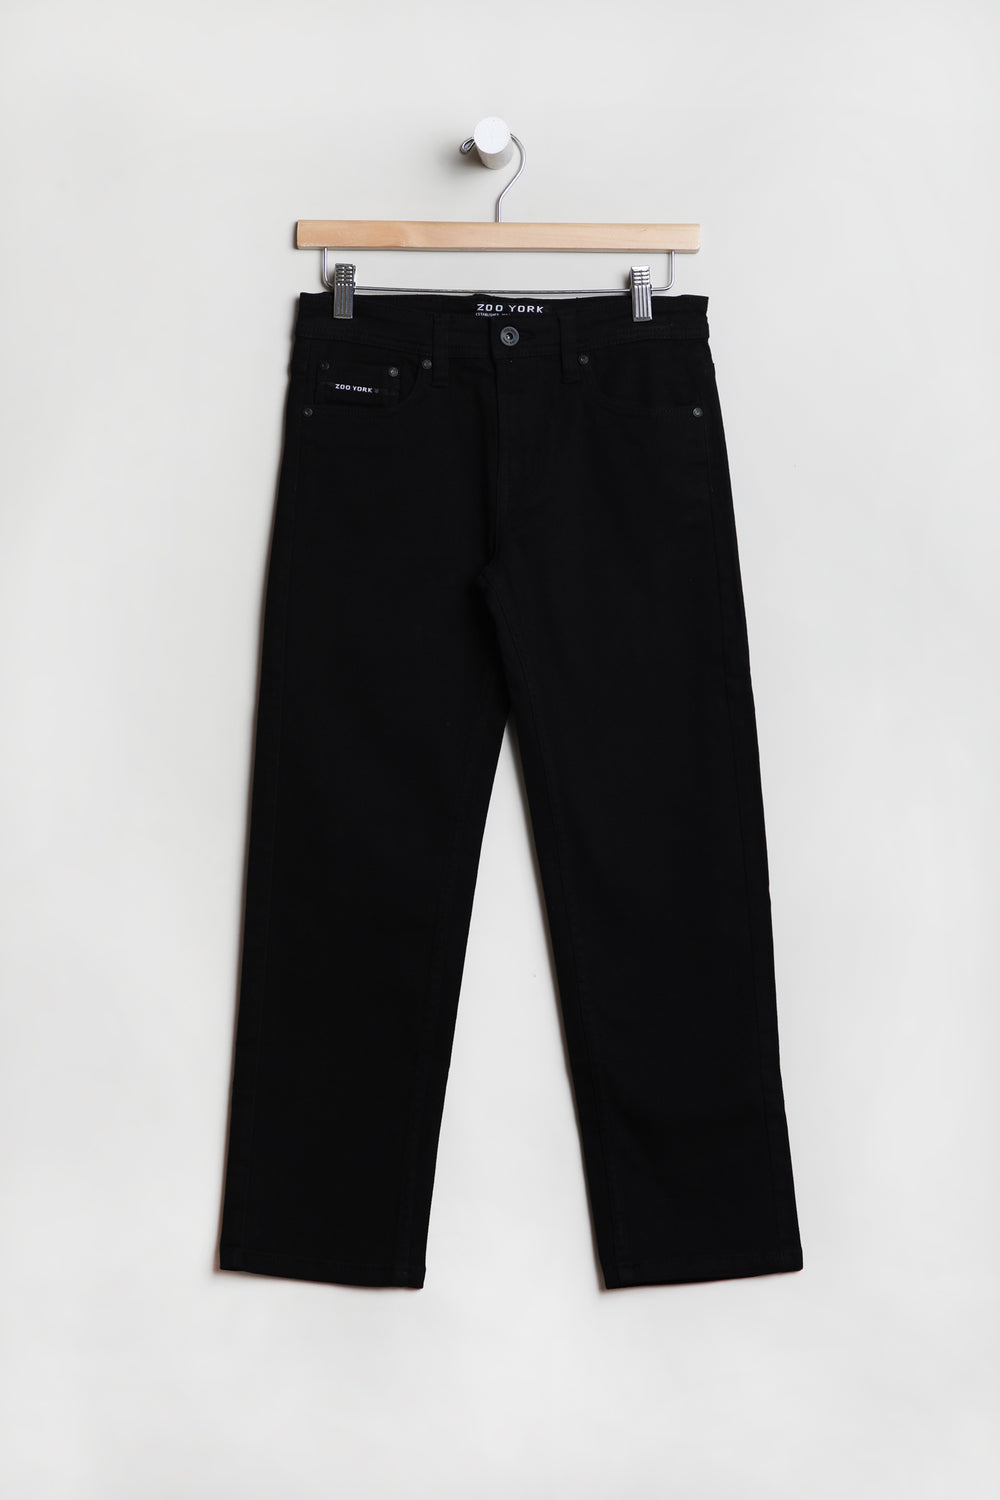 Zoo York Youth Relaxed Bull Denim Jeans Zoo York Youth Relaxed Bull Denim Jeans